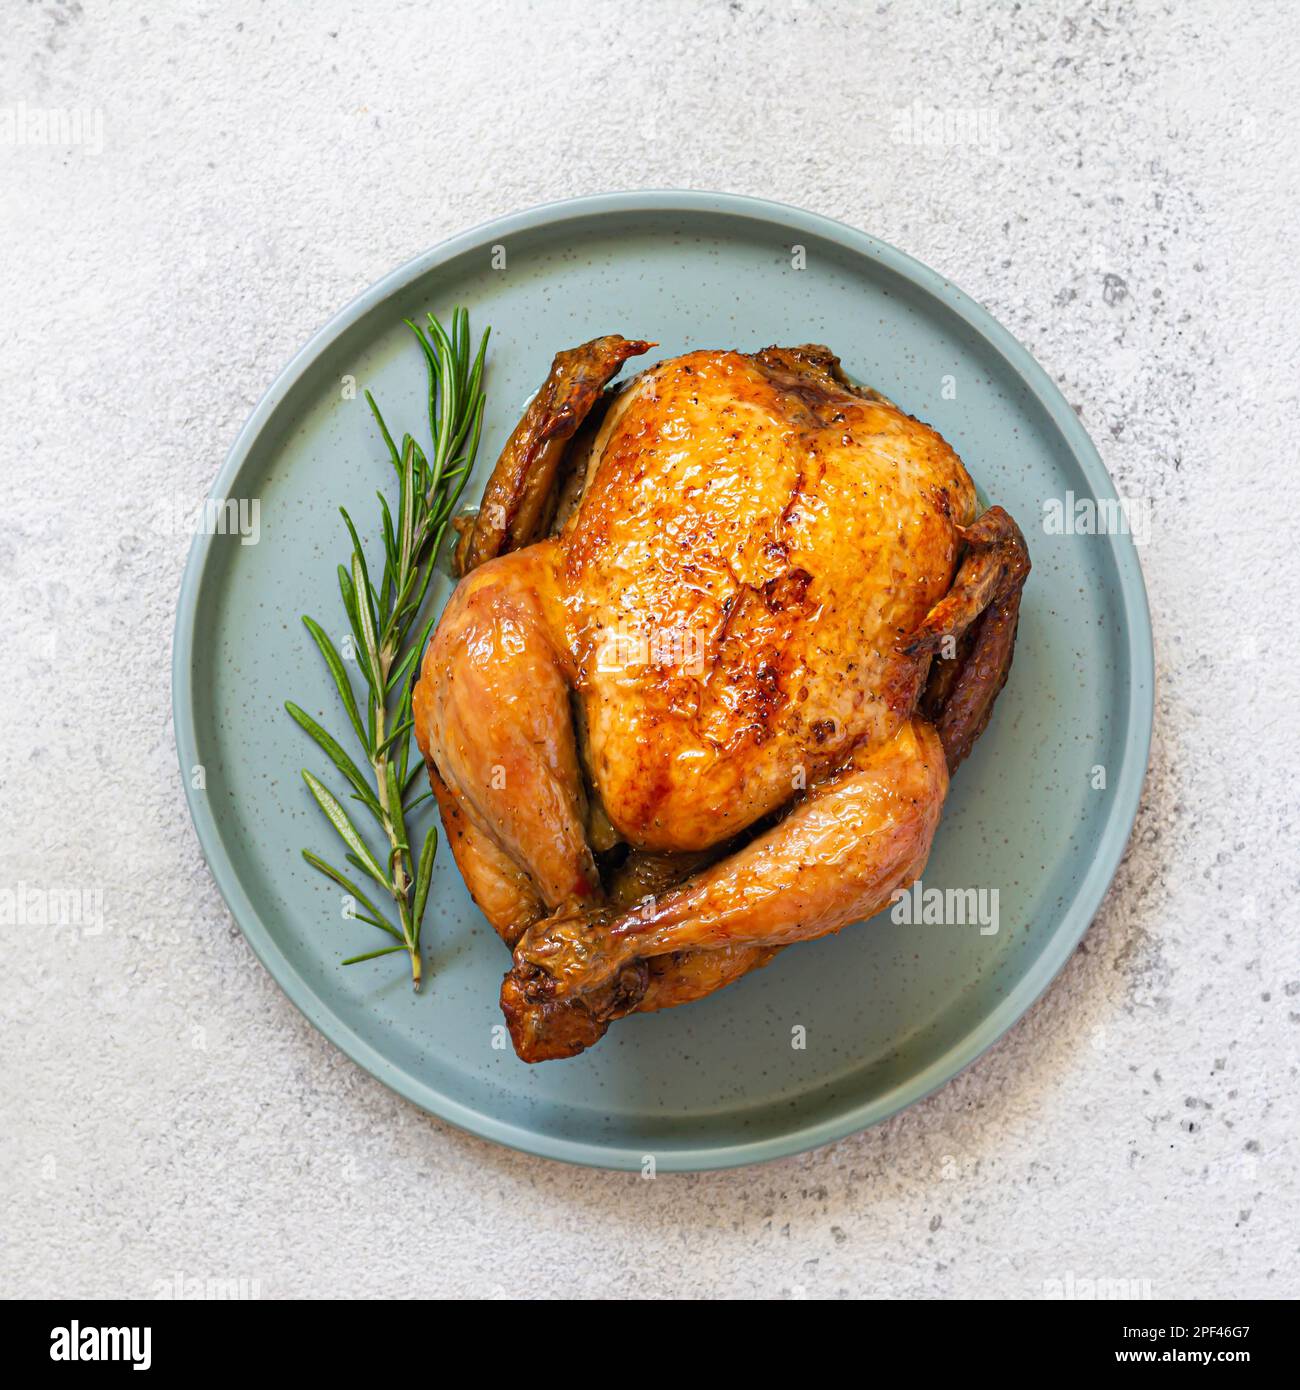 Whole baked (fried) chicken in spices with rosemary on a dish on  light background. Festive food for thanksgiving, birthday. Fast food, top view. Stock Photo